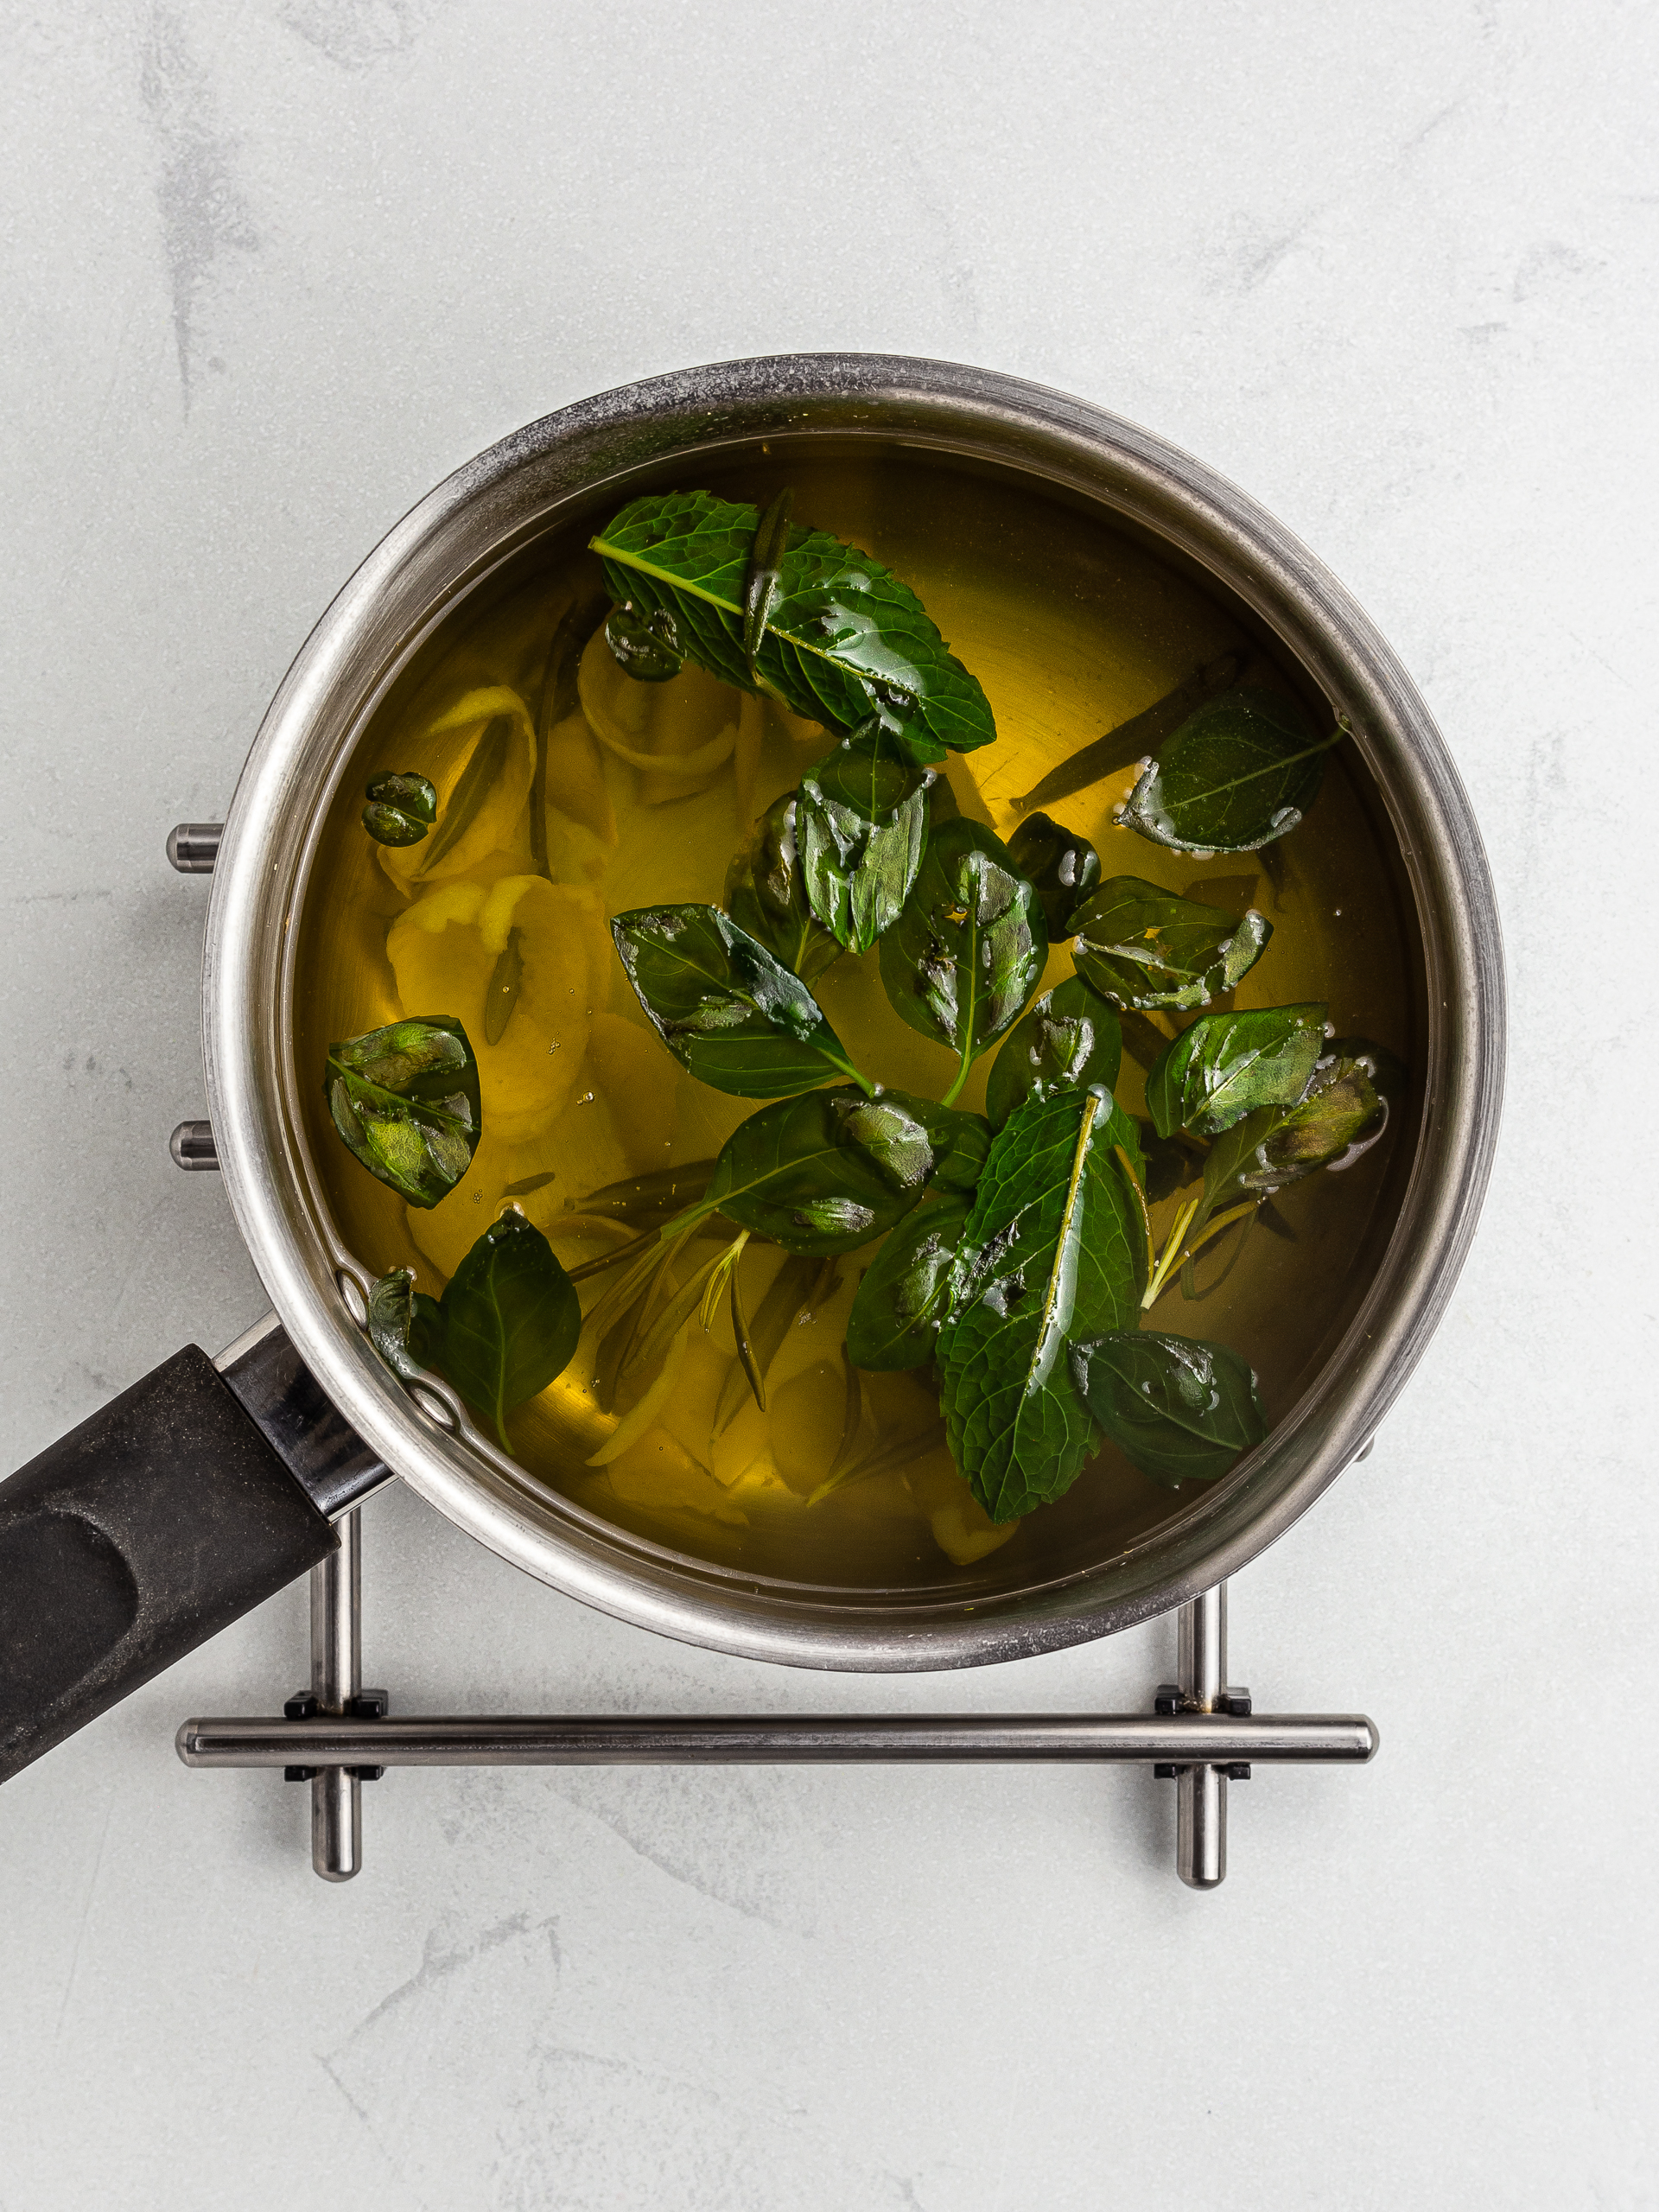 fresh herbs infusing in a pot of hot water